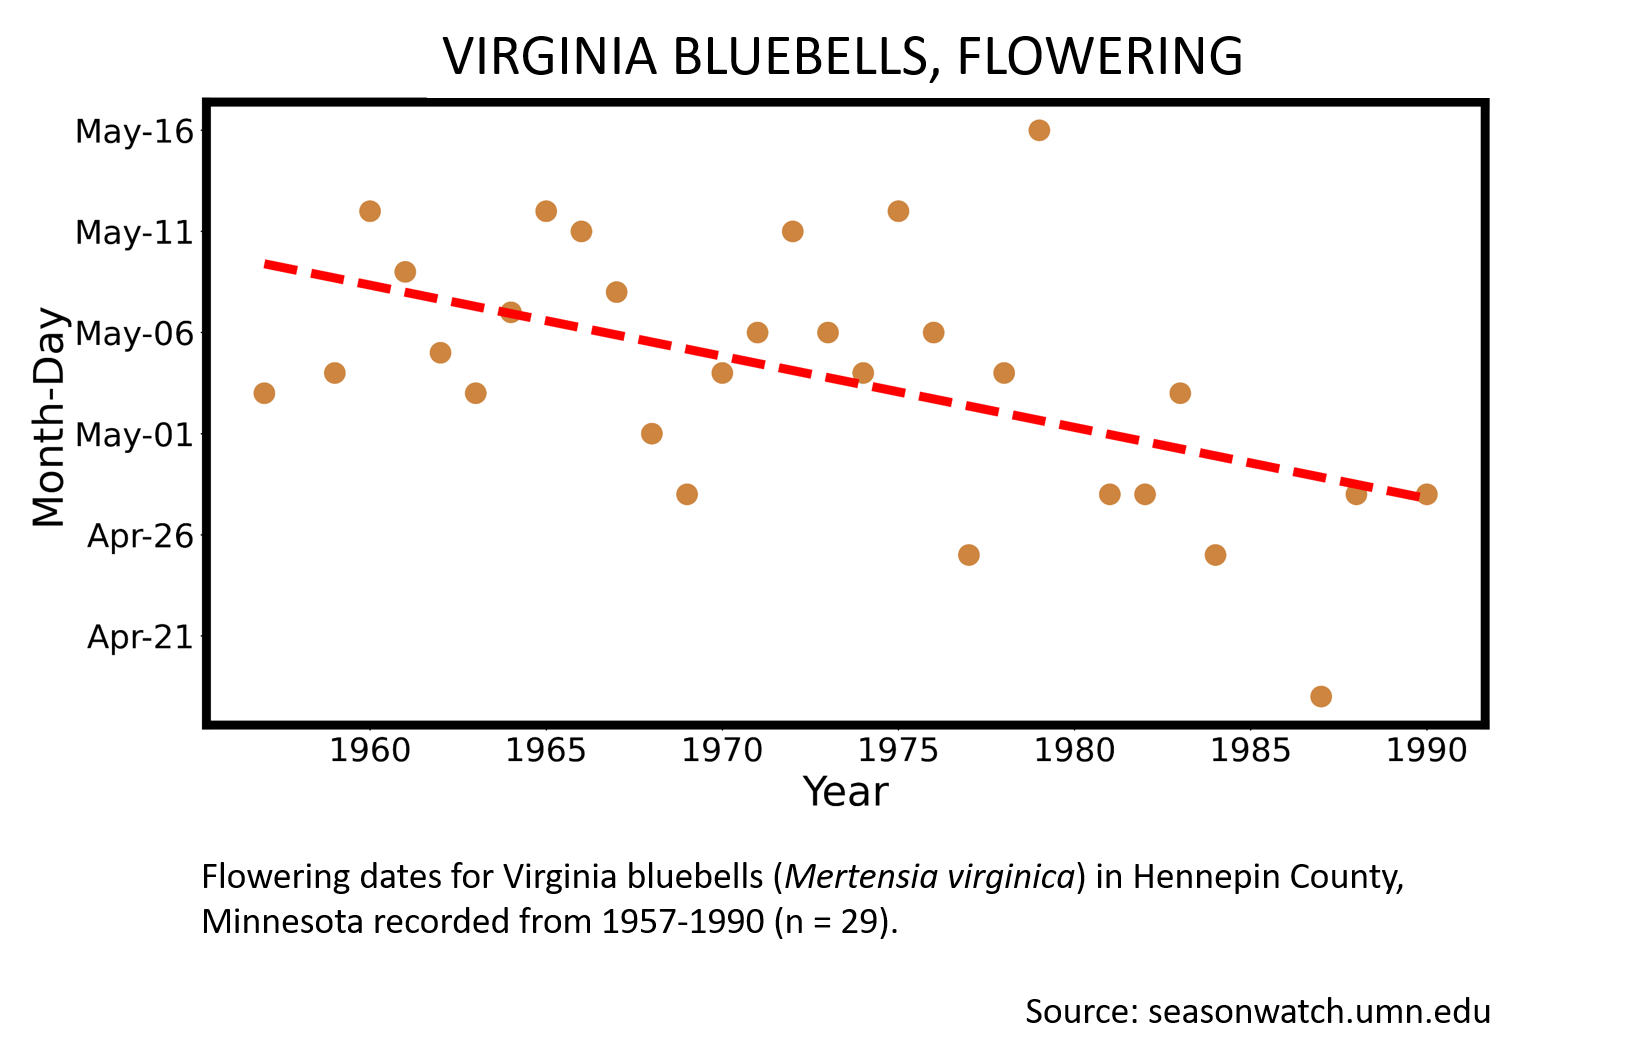 Scatterplot showing Virginia bluebells phenology observations in Hennepin County, Minnesota